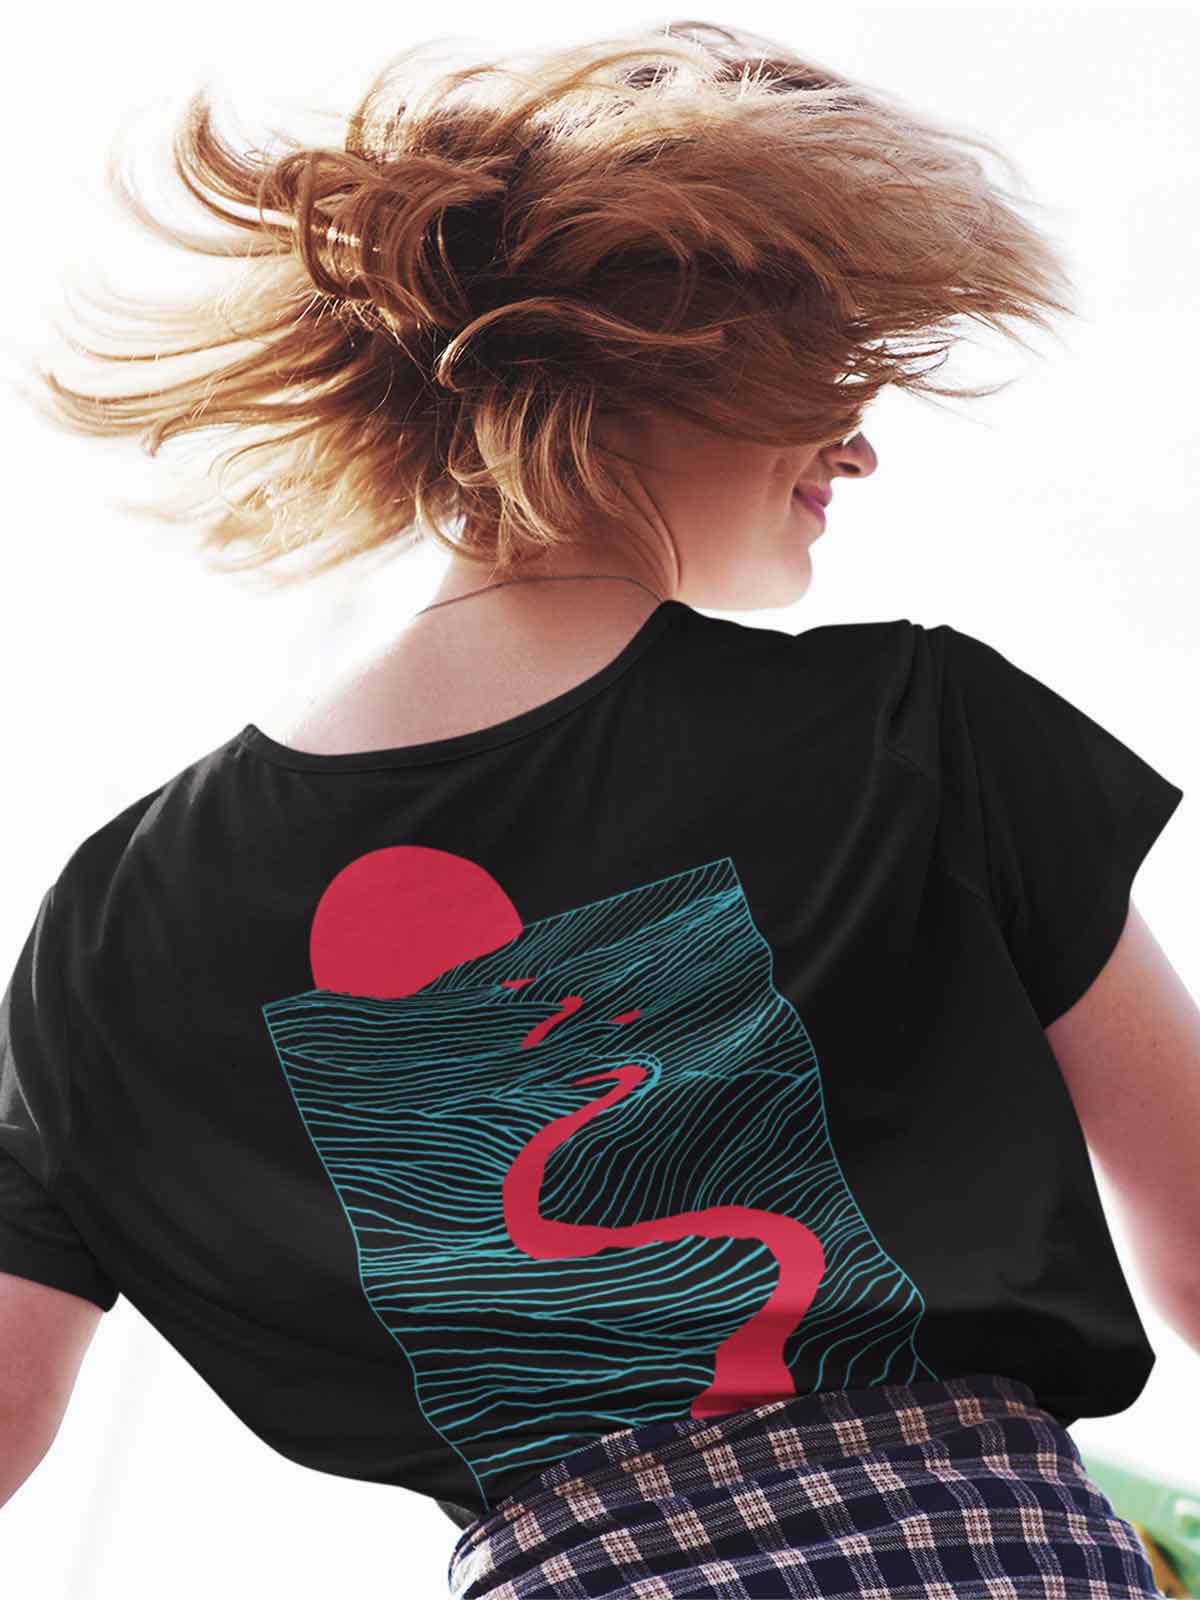 Just-flow-with-it-backprint-t-shirt-for-women by Ghumakkad